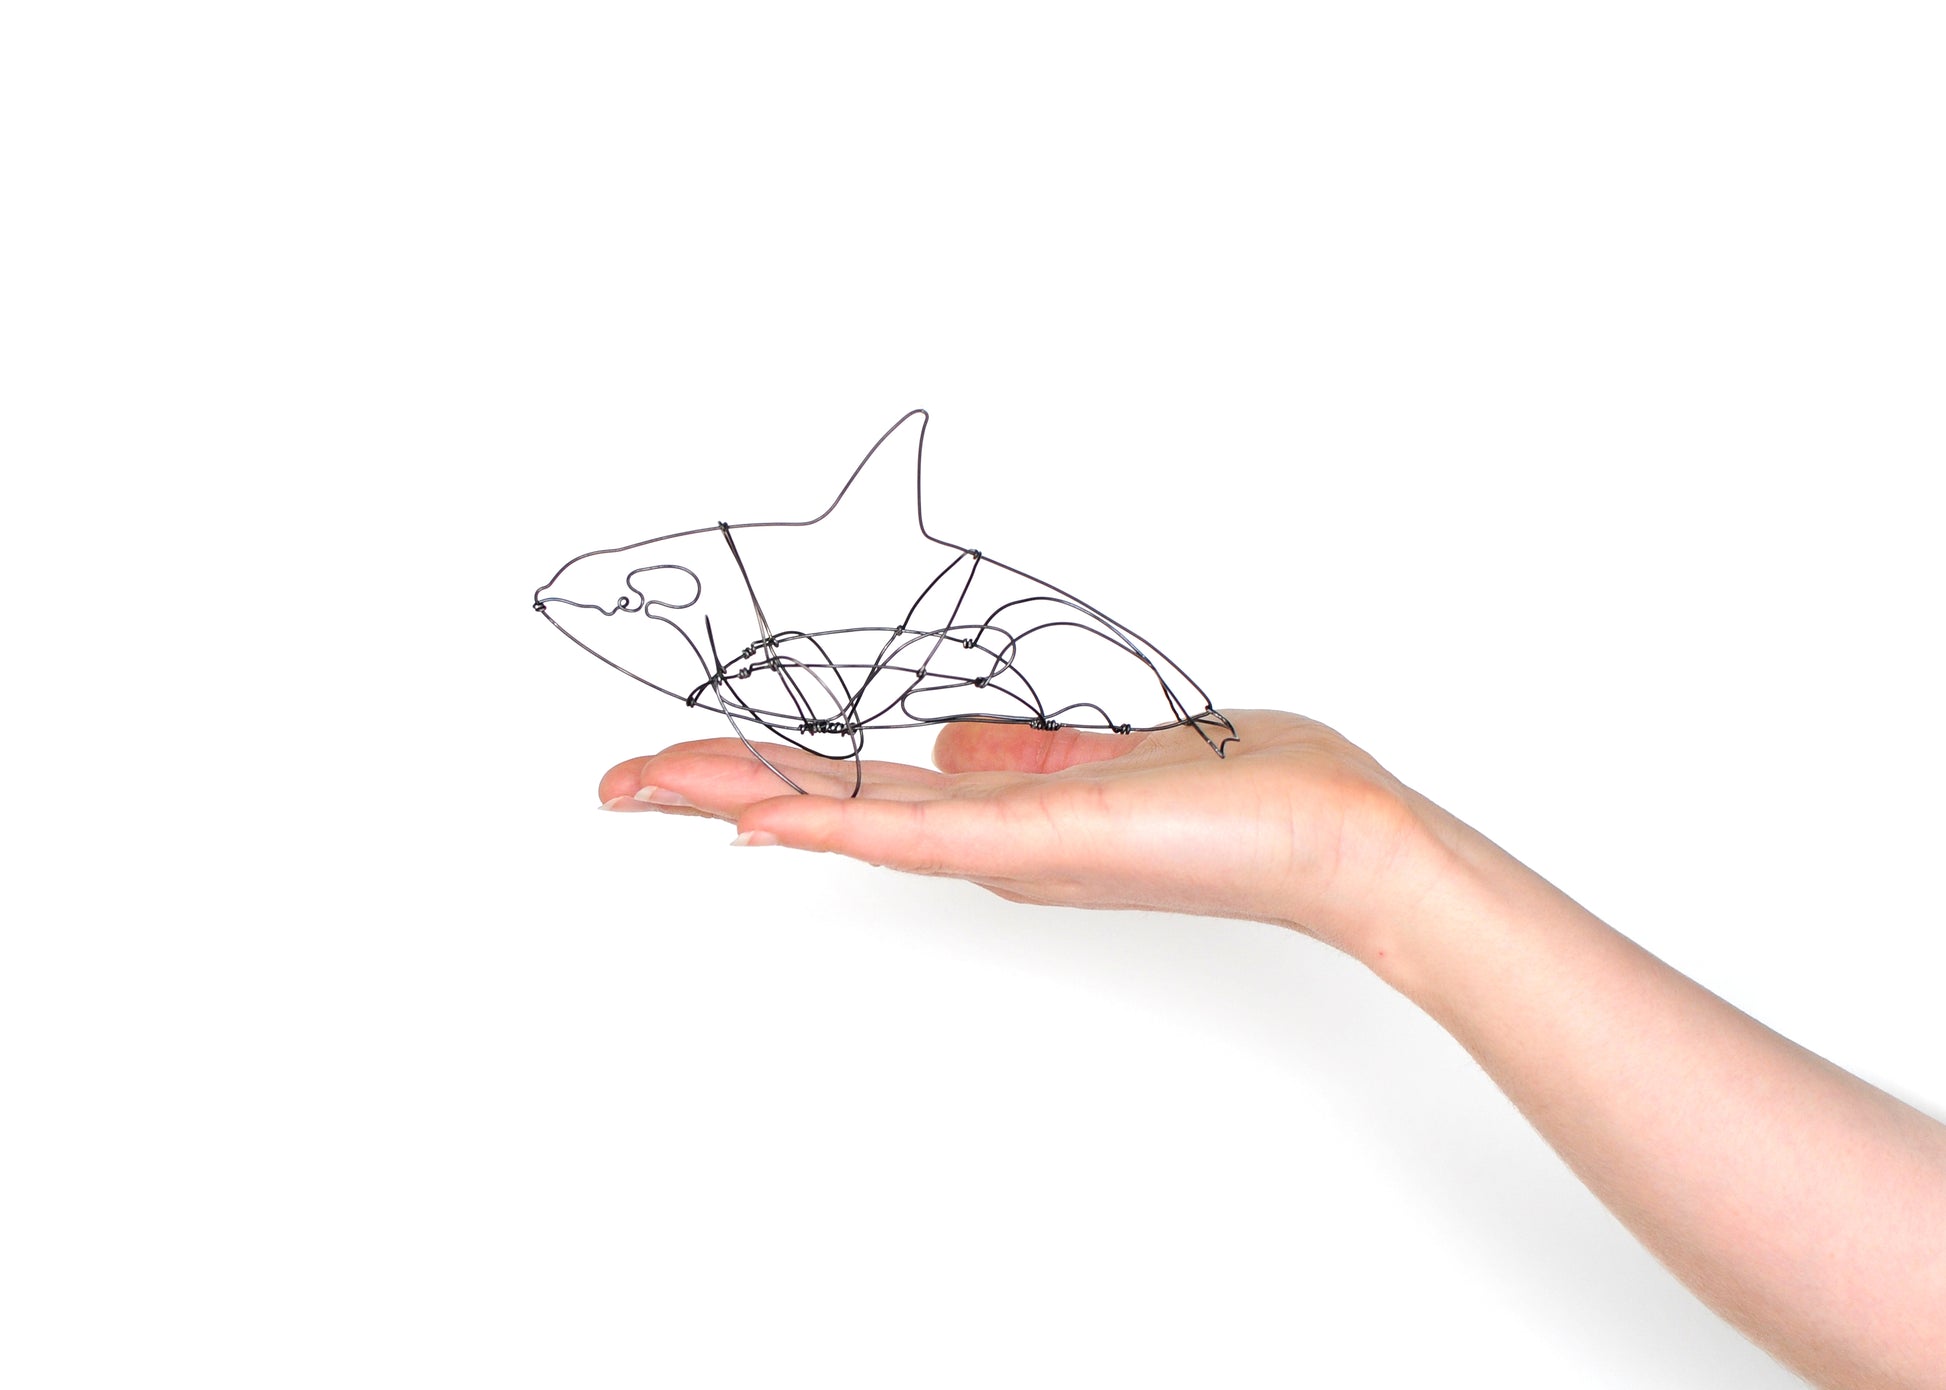 Photo of a 3D wire orca whale sculpture held in a hand.